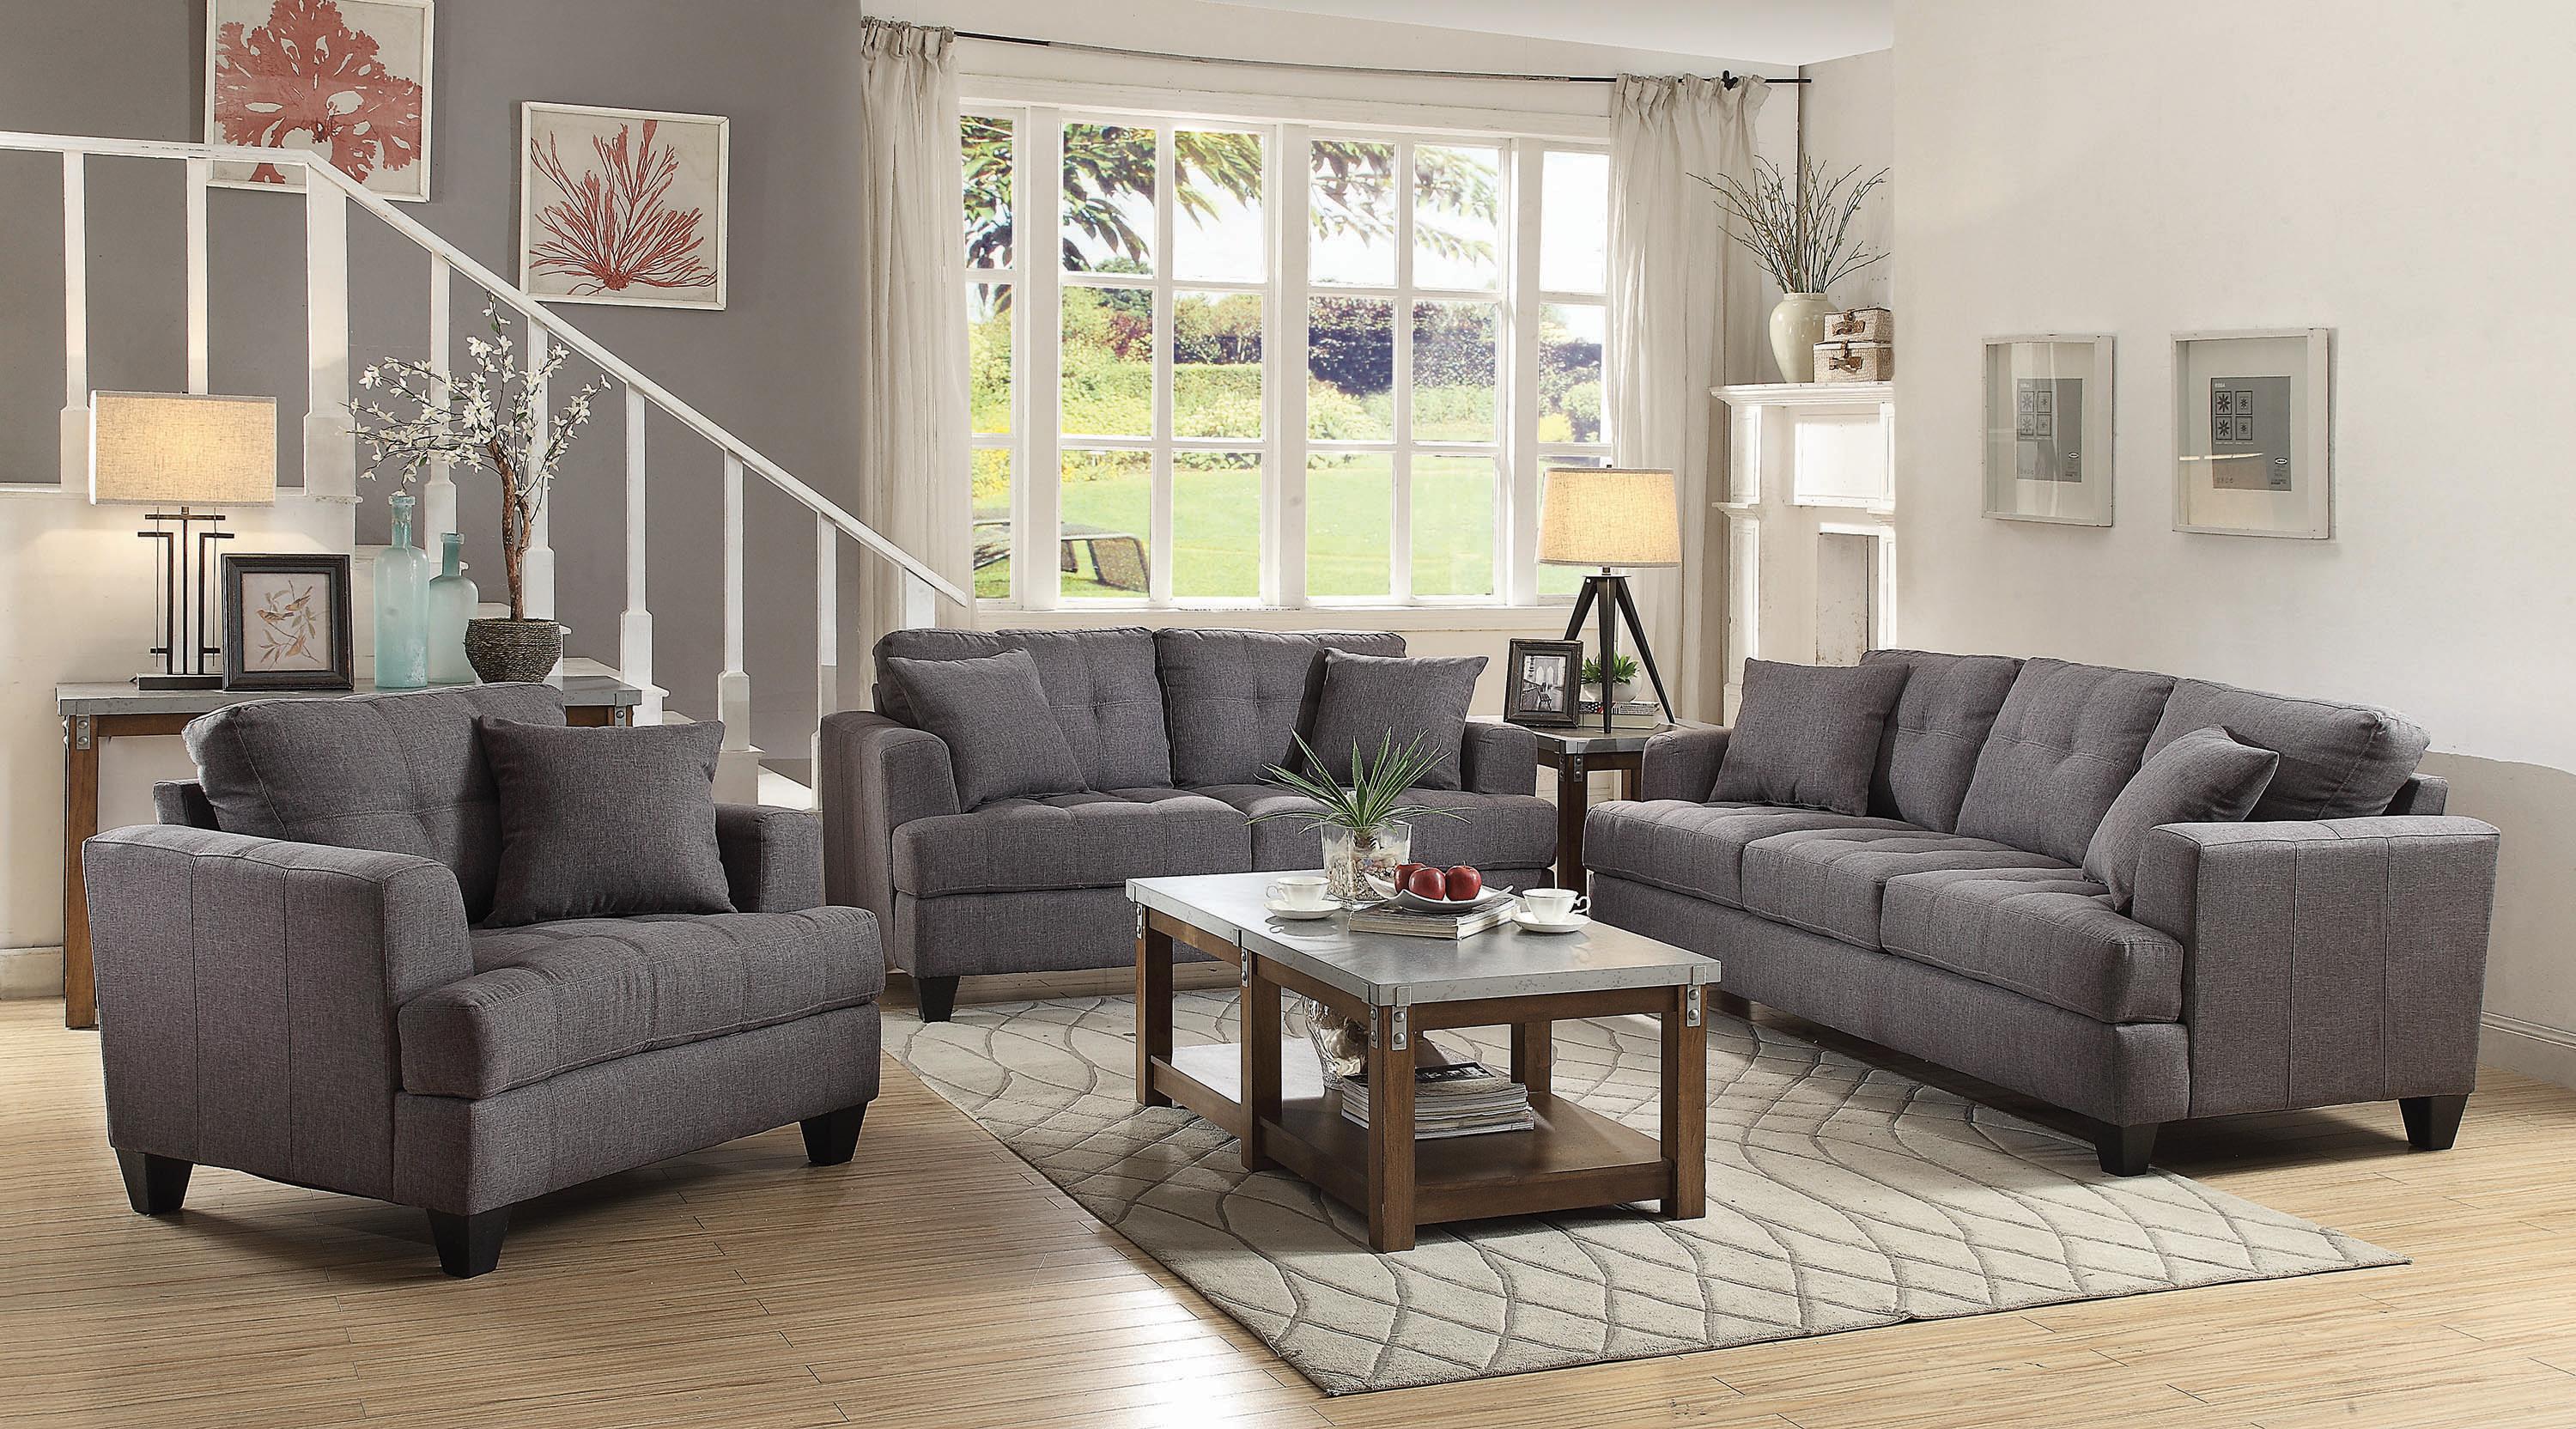 Transitional Living Room Set 505175-S3 Samuel 505175-S3 in Charcoal 